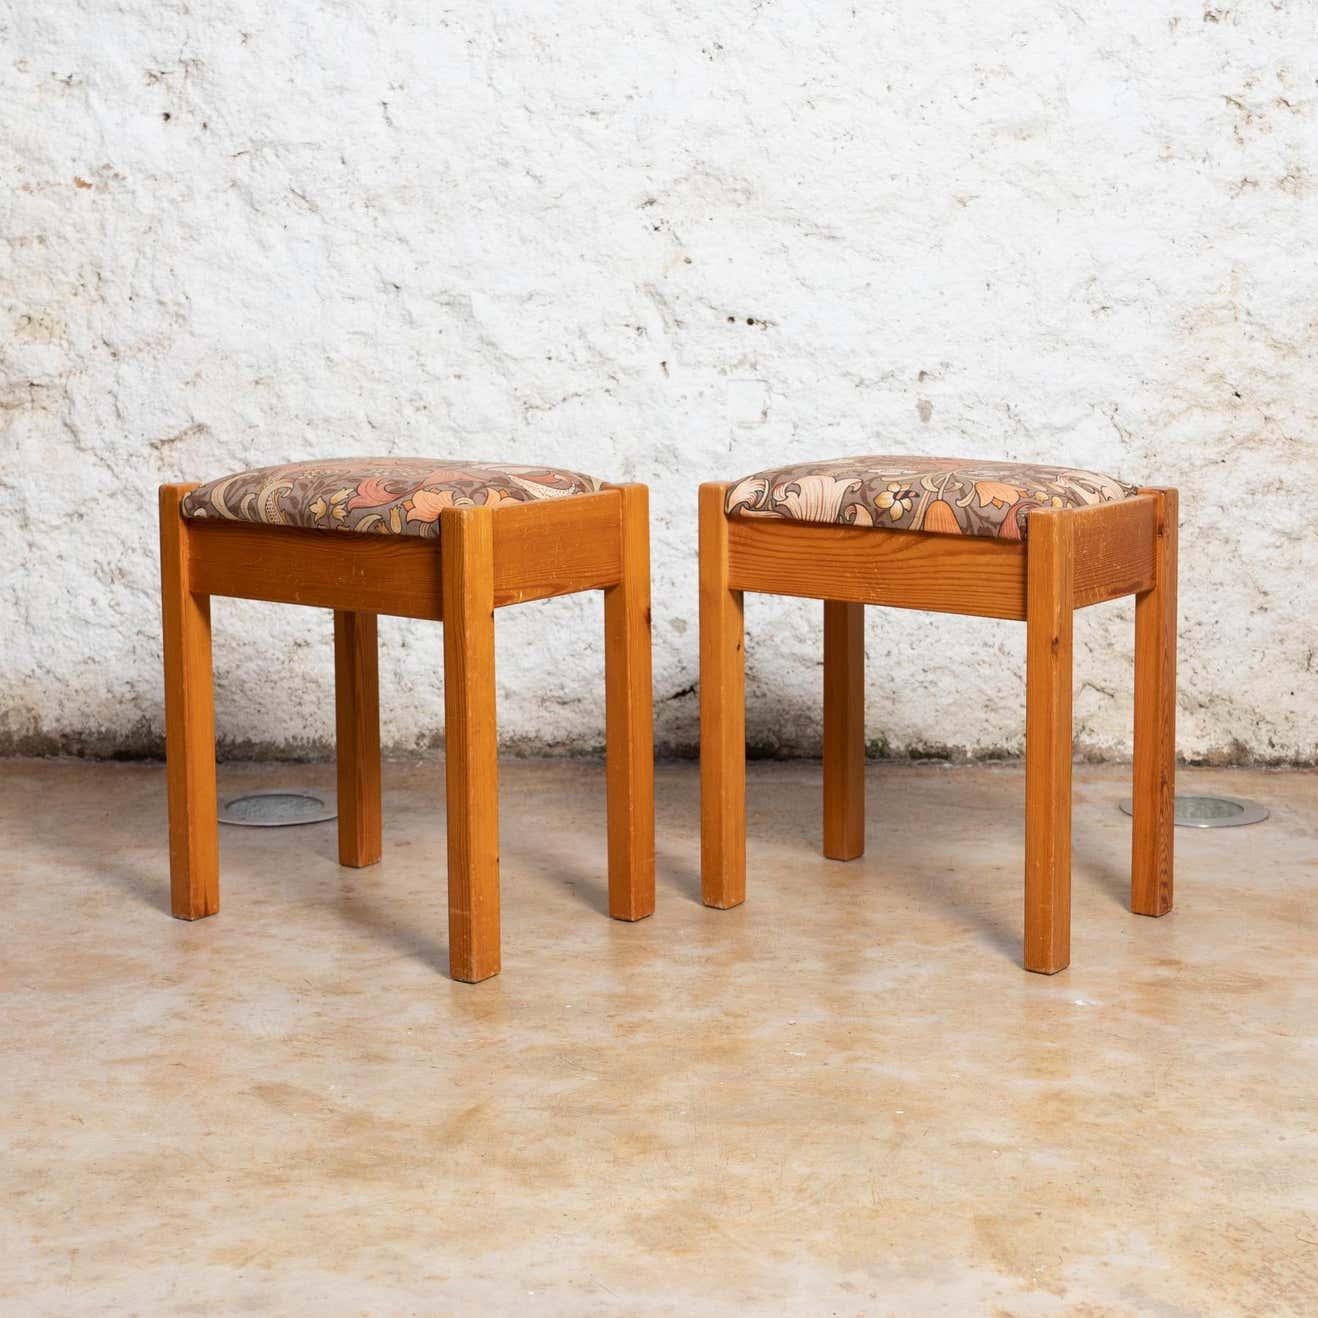 Set of Two Traditional Catalan Pine Stools in Original Fabric, circa 1960 For Sale 4